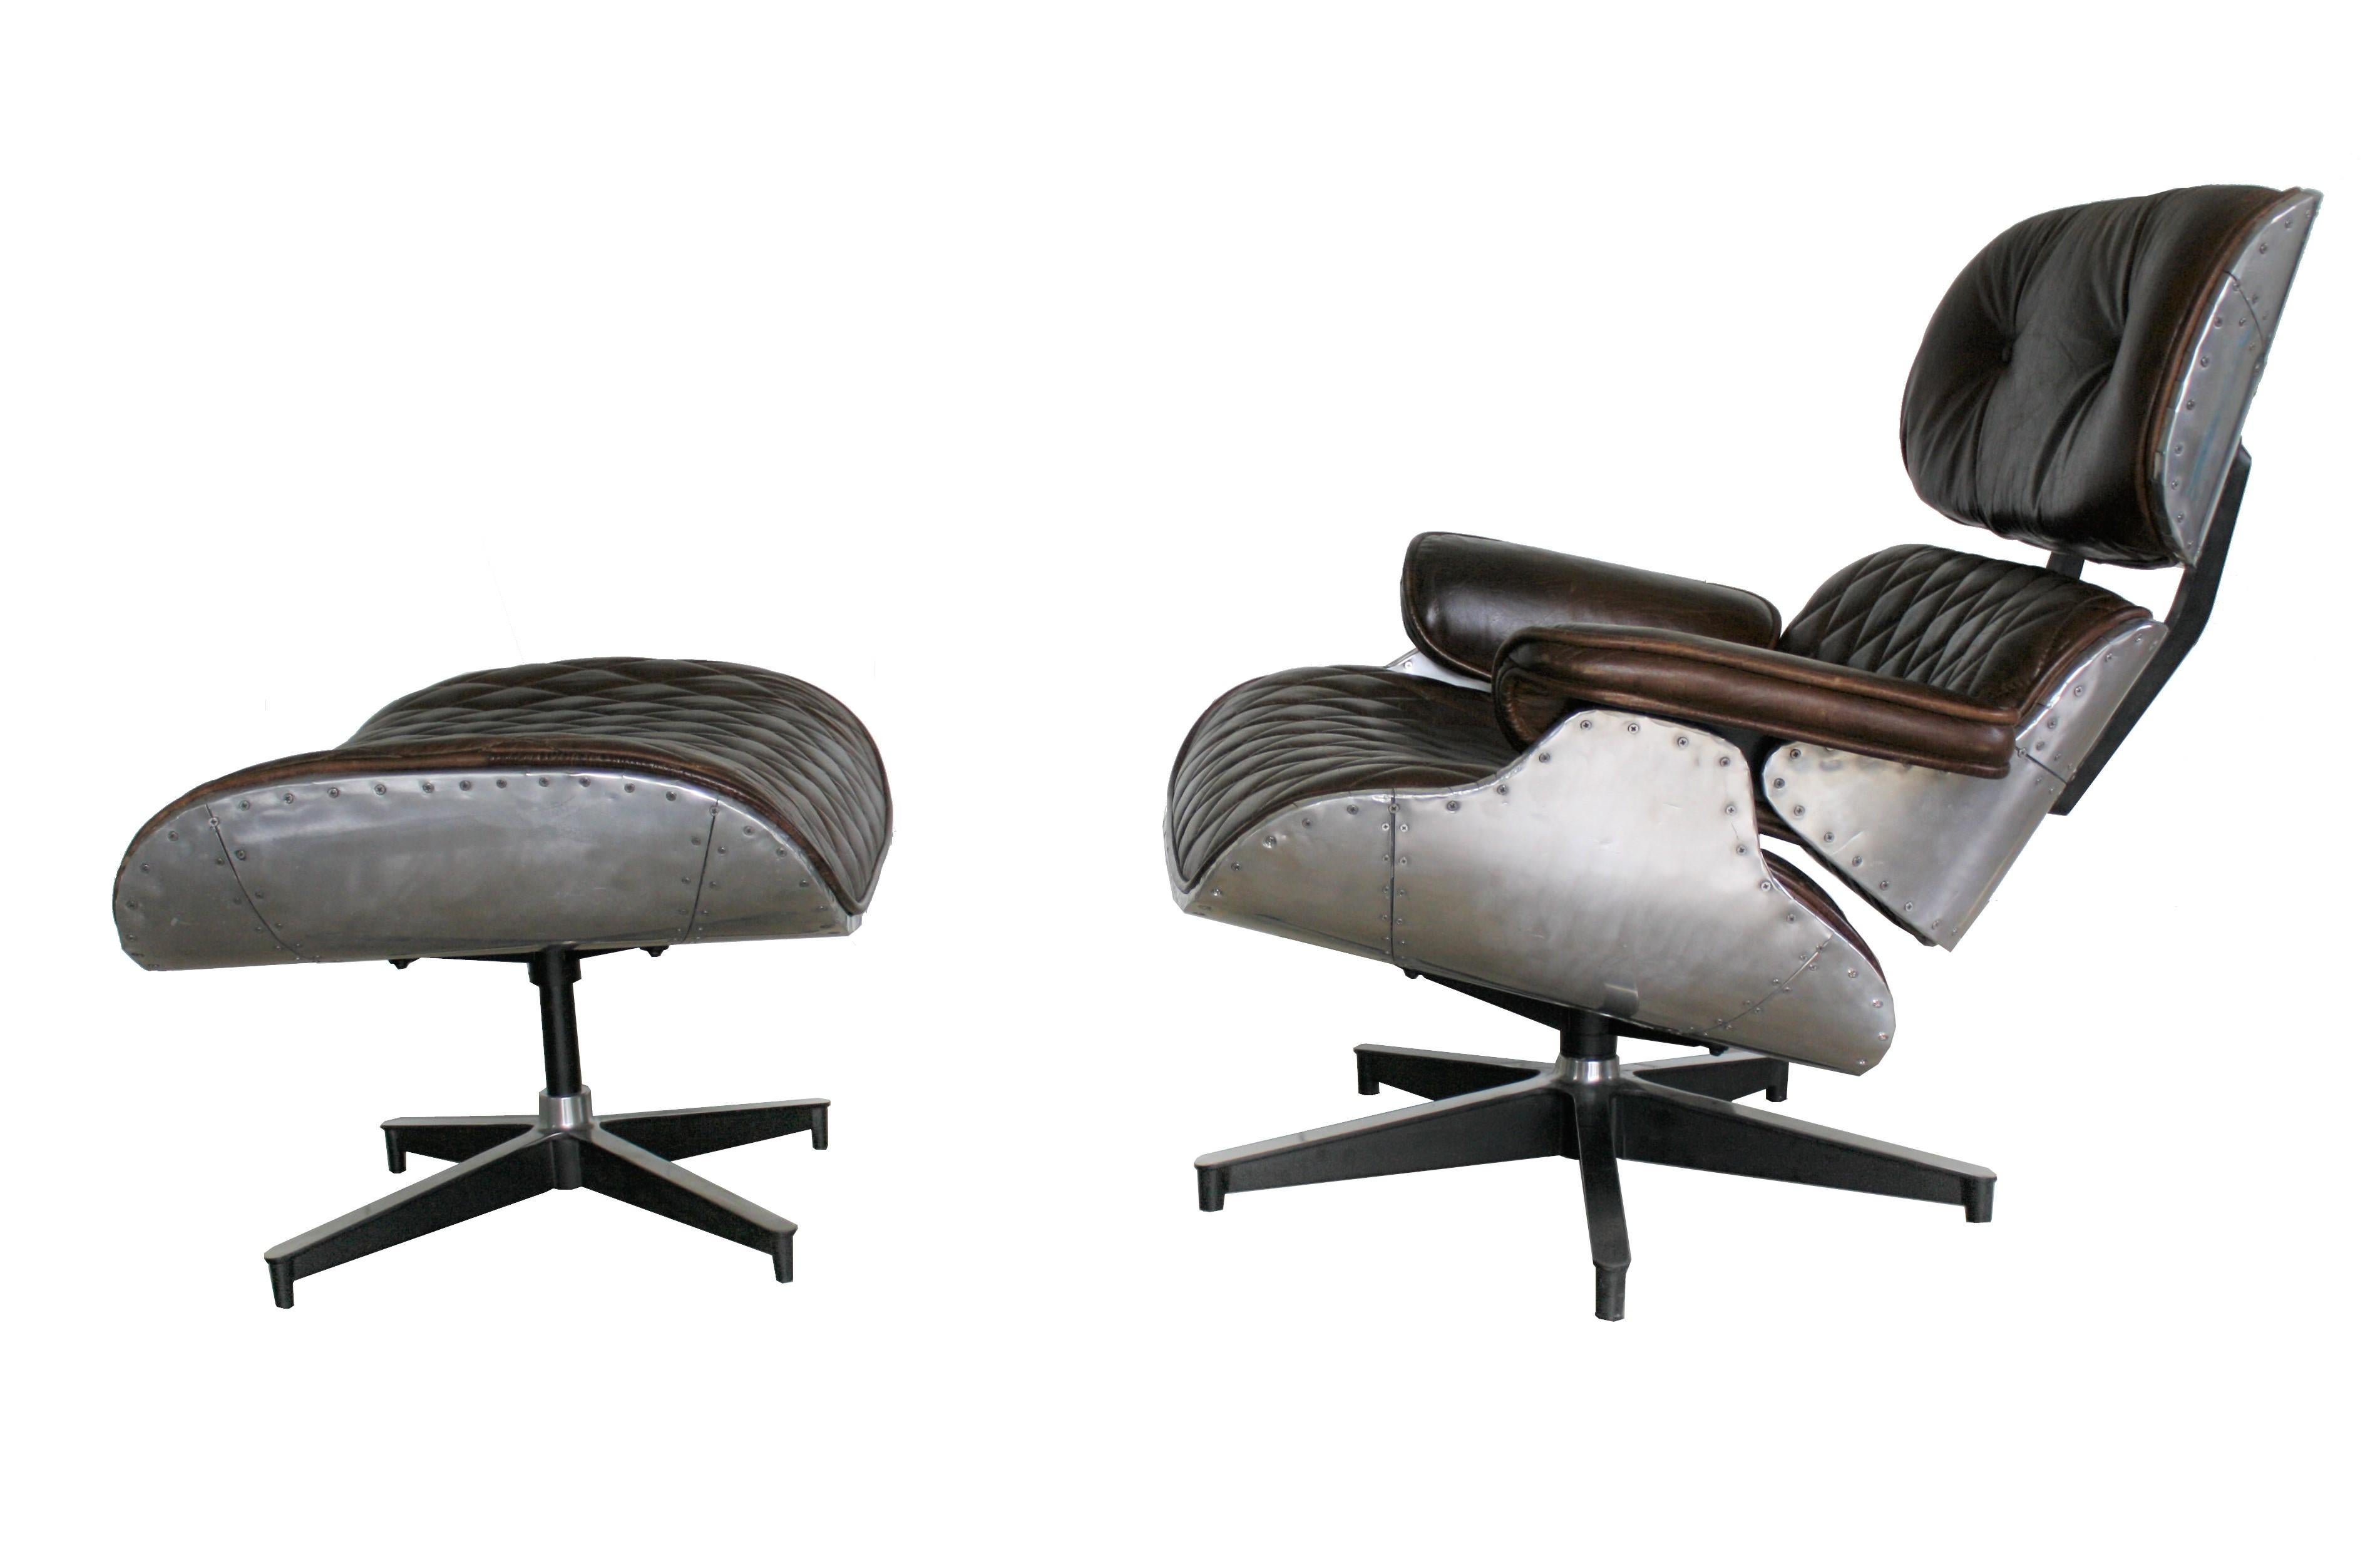 Unique Eames Lounge Chair and Ottoman Aviator Style 1